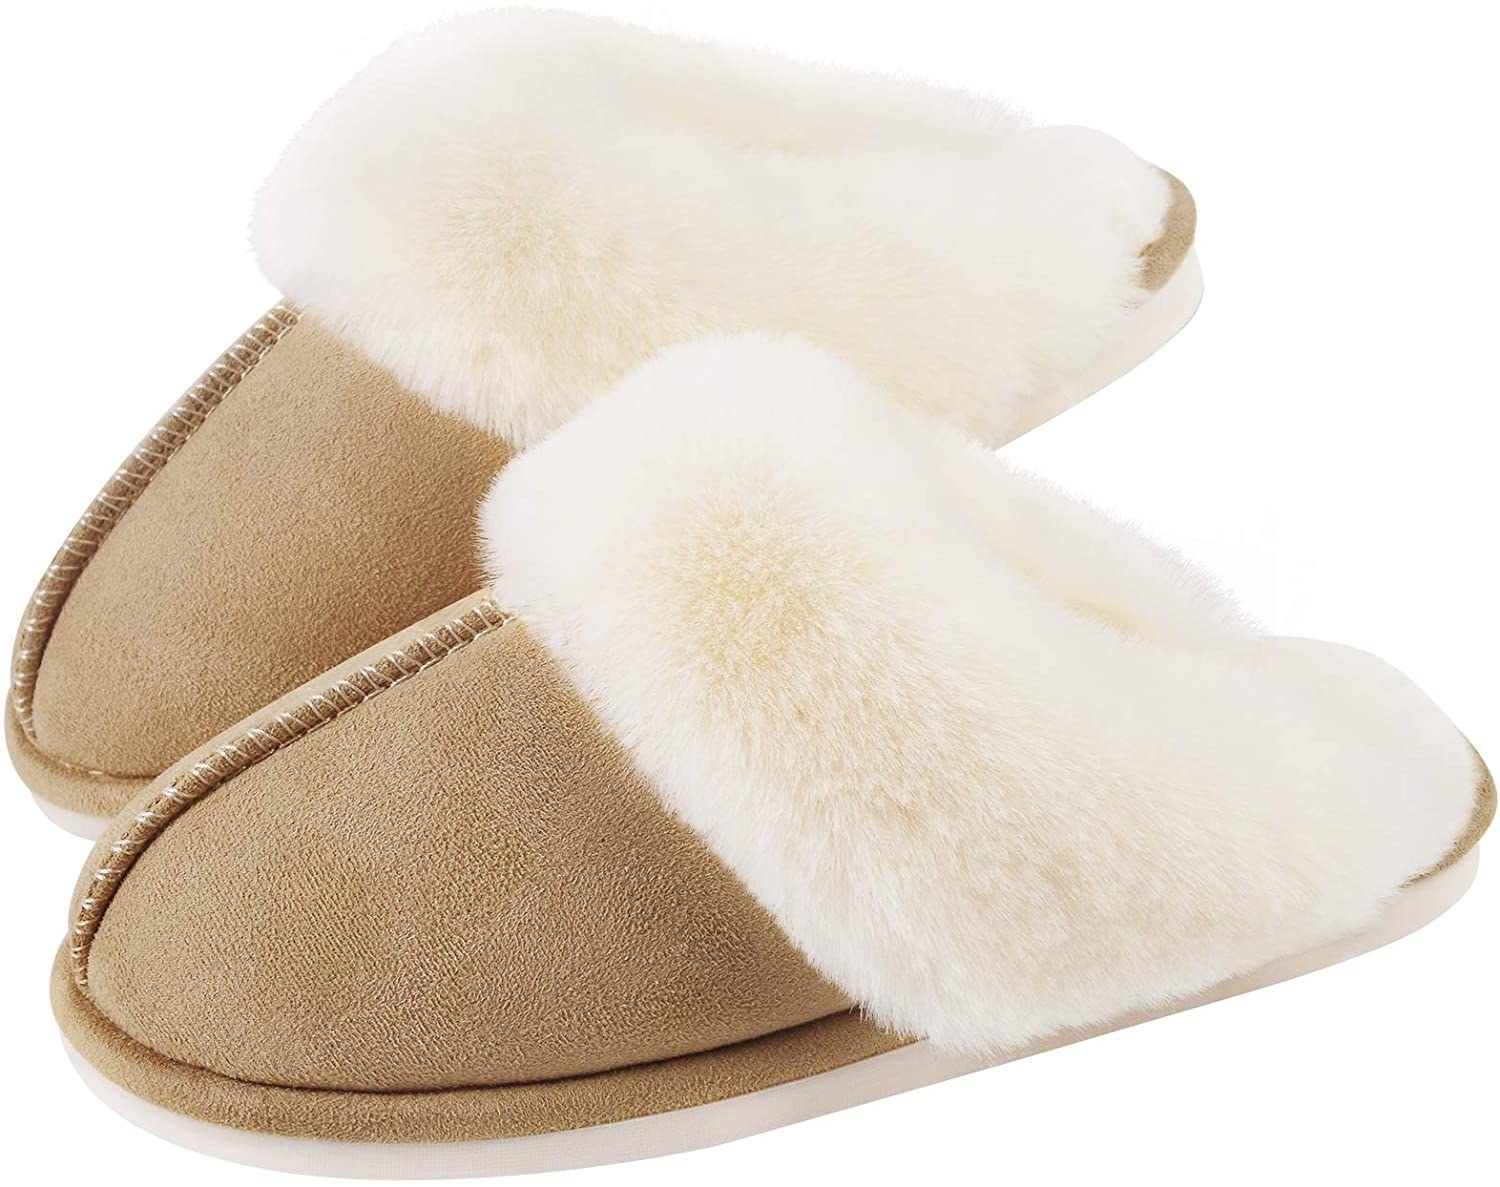 The slippers in beige